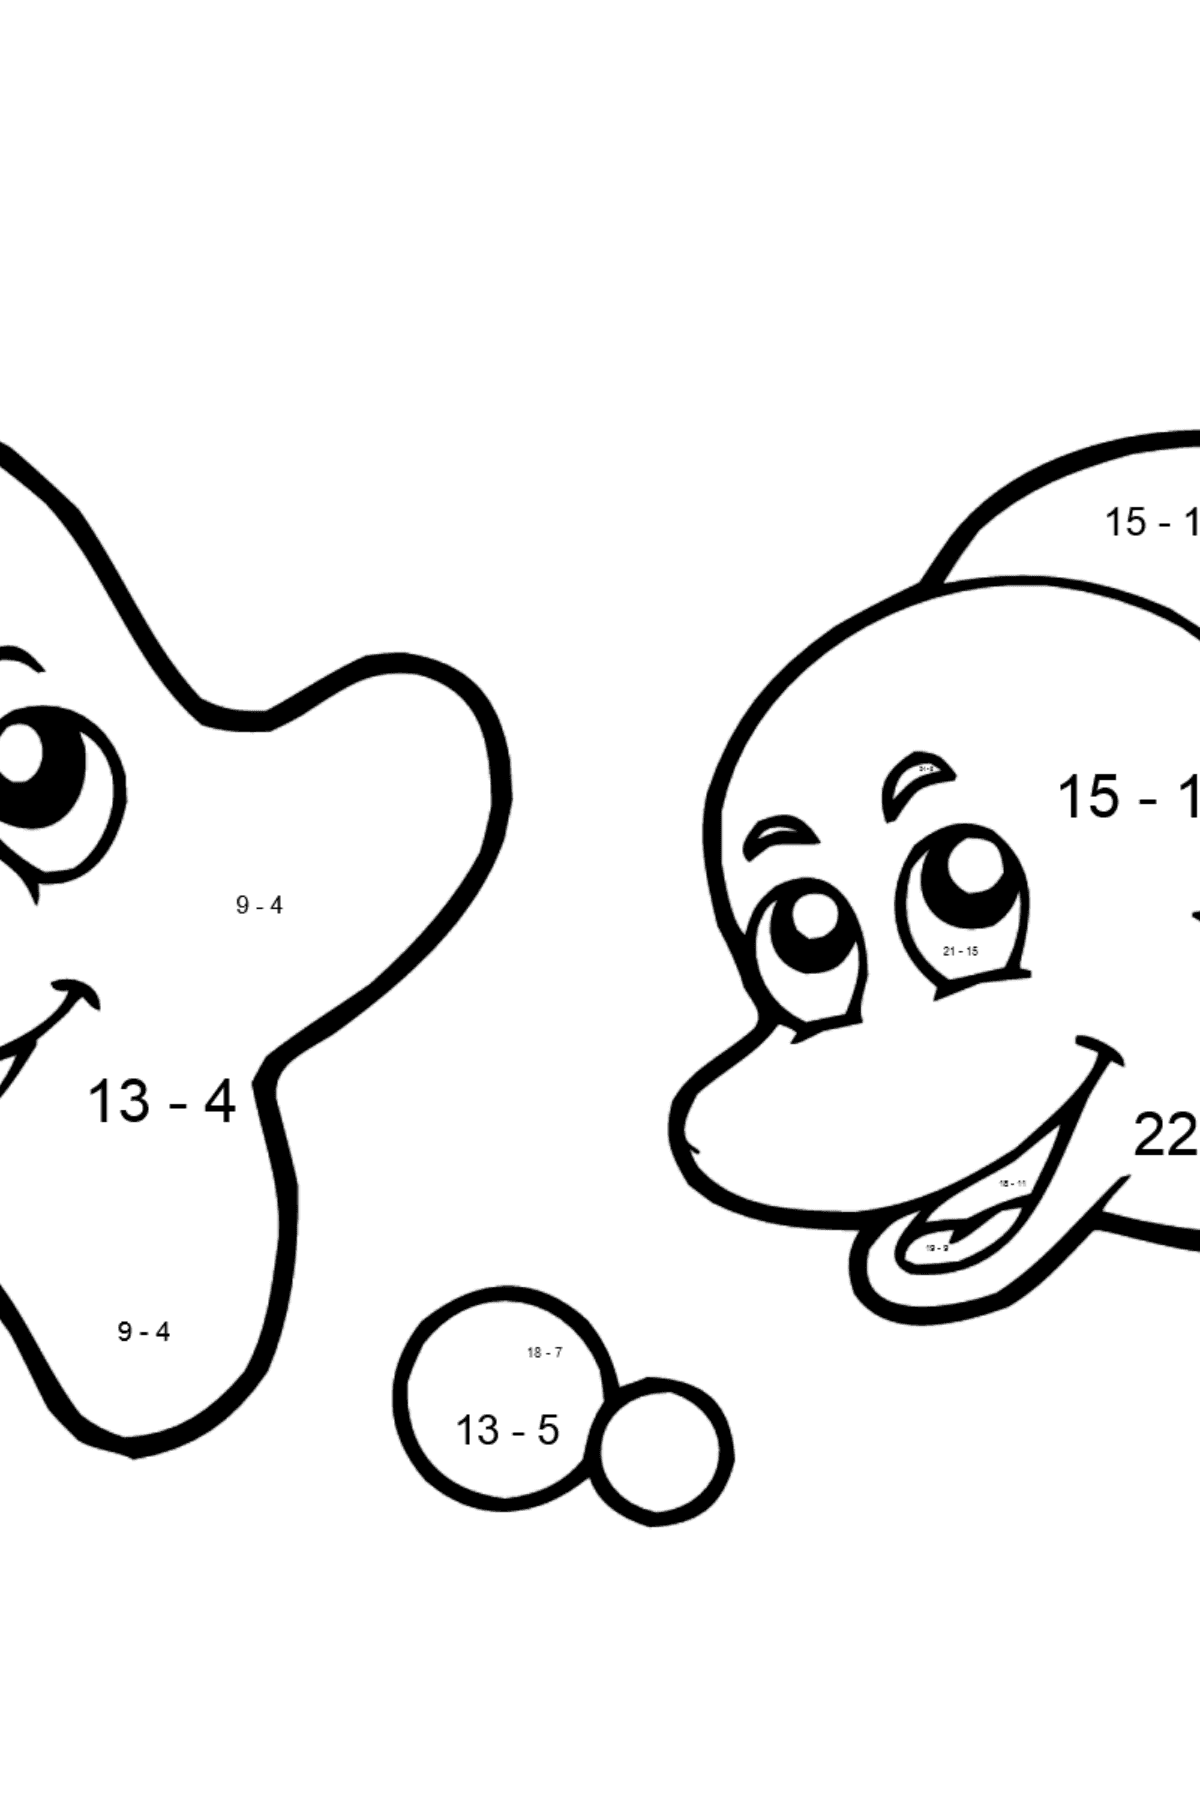 Dolphin and Starfish Coloring page - Math Coloring - Subtraction for Kids